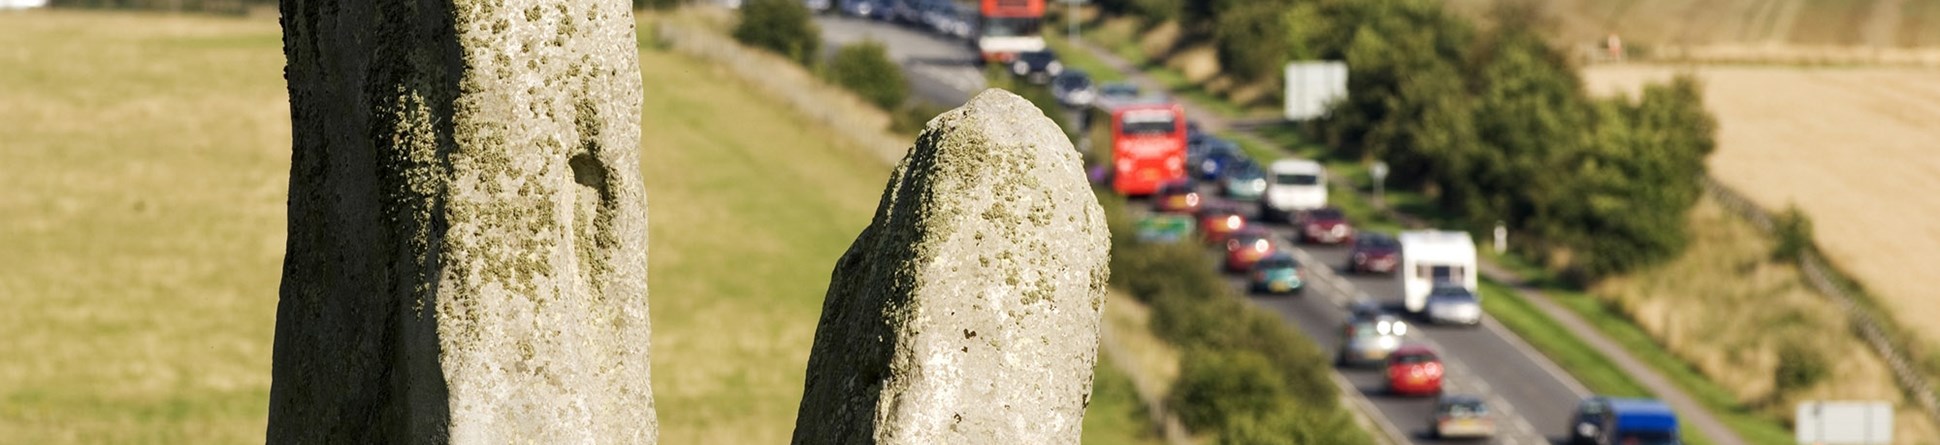 View of the passing traffic at Stonehenge